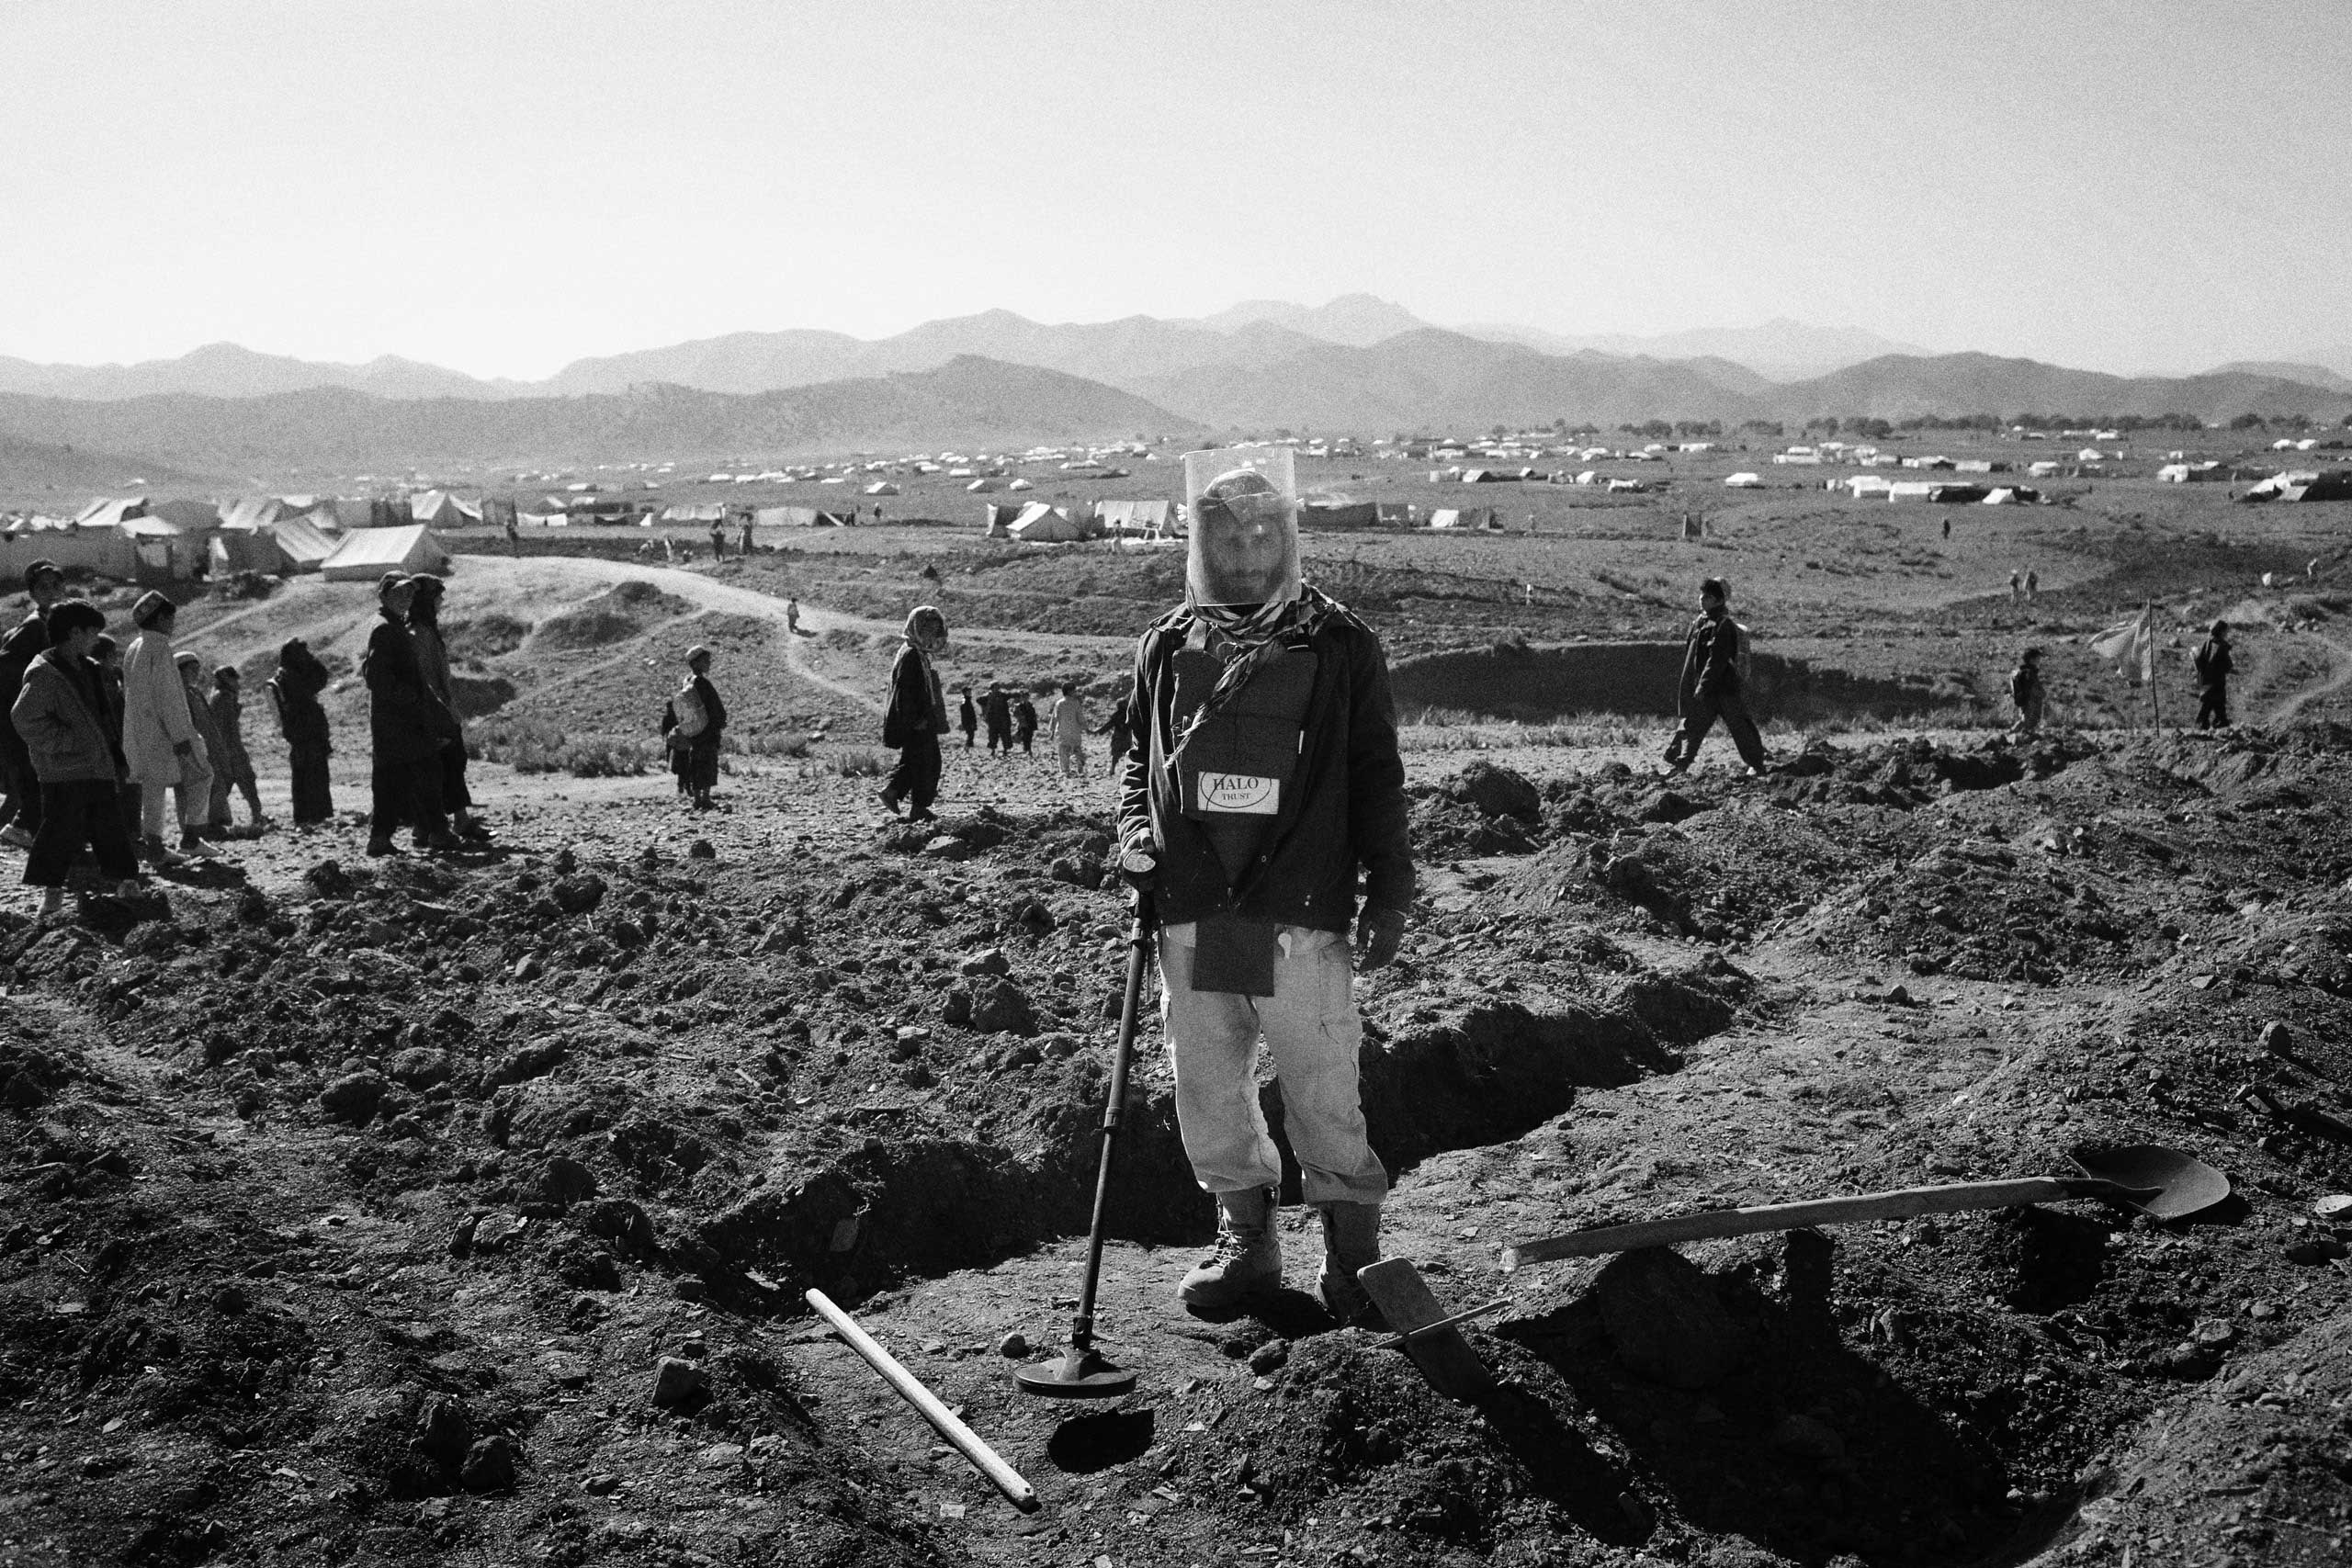 Foreign Policy: Finding Refuge on a Mine FieldA de-miner from the NGO, Halo Trust works at a site in the Gulan refugee camp in Khost Province, Afghanistan.